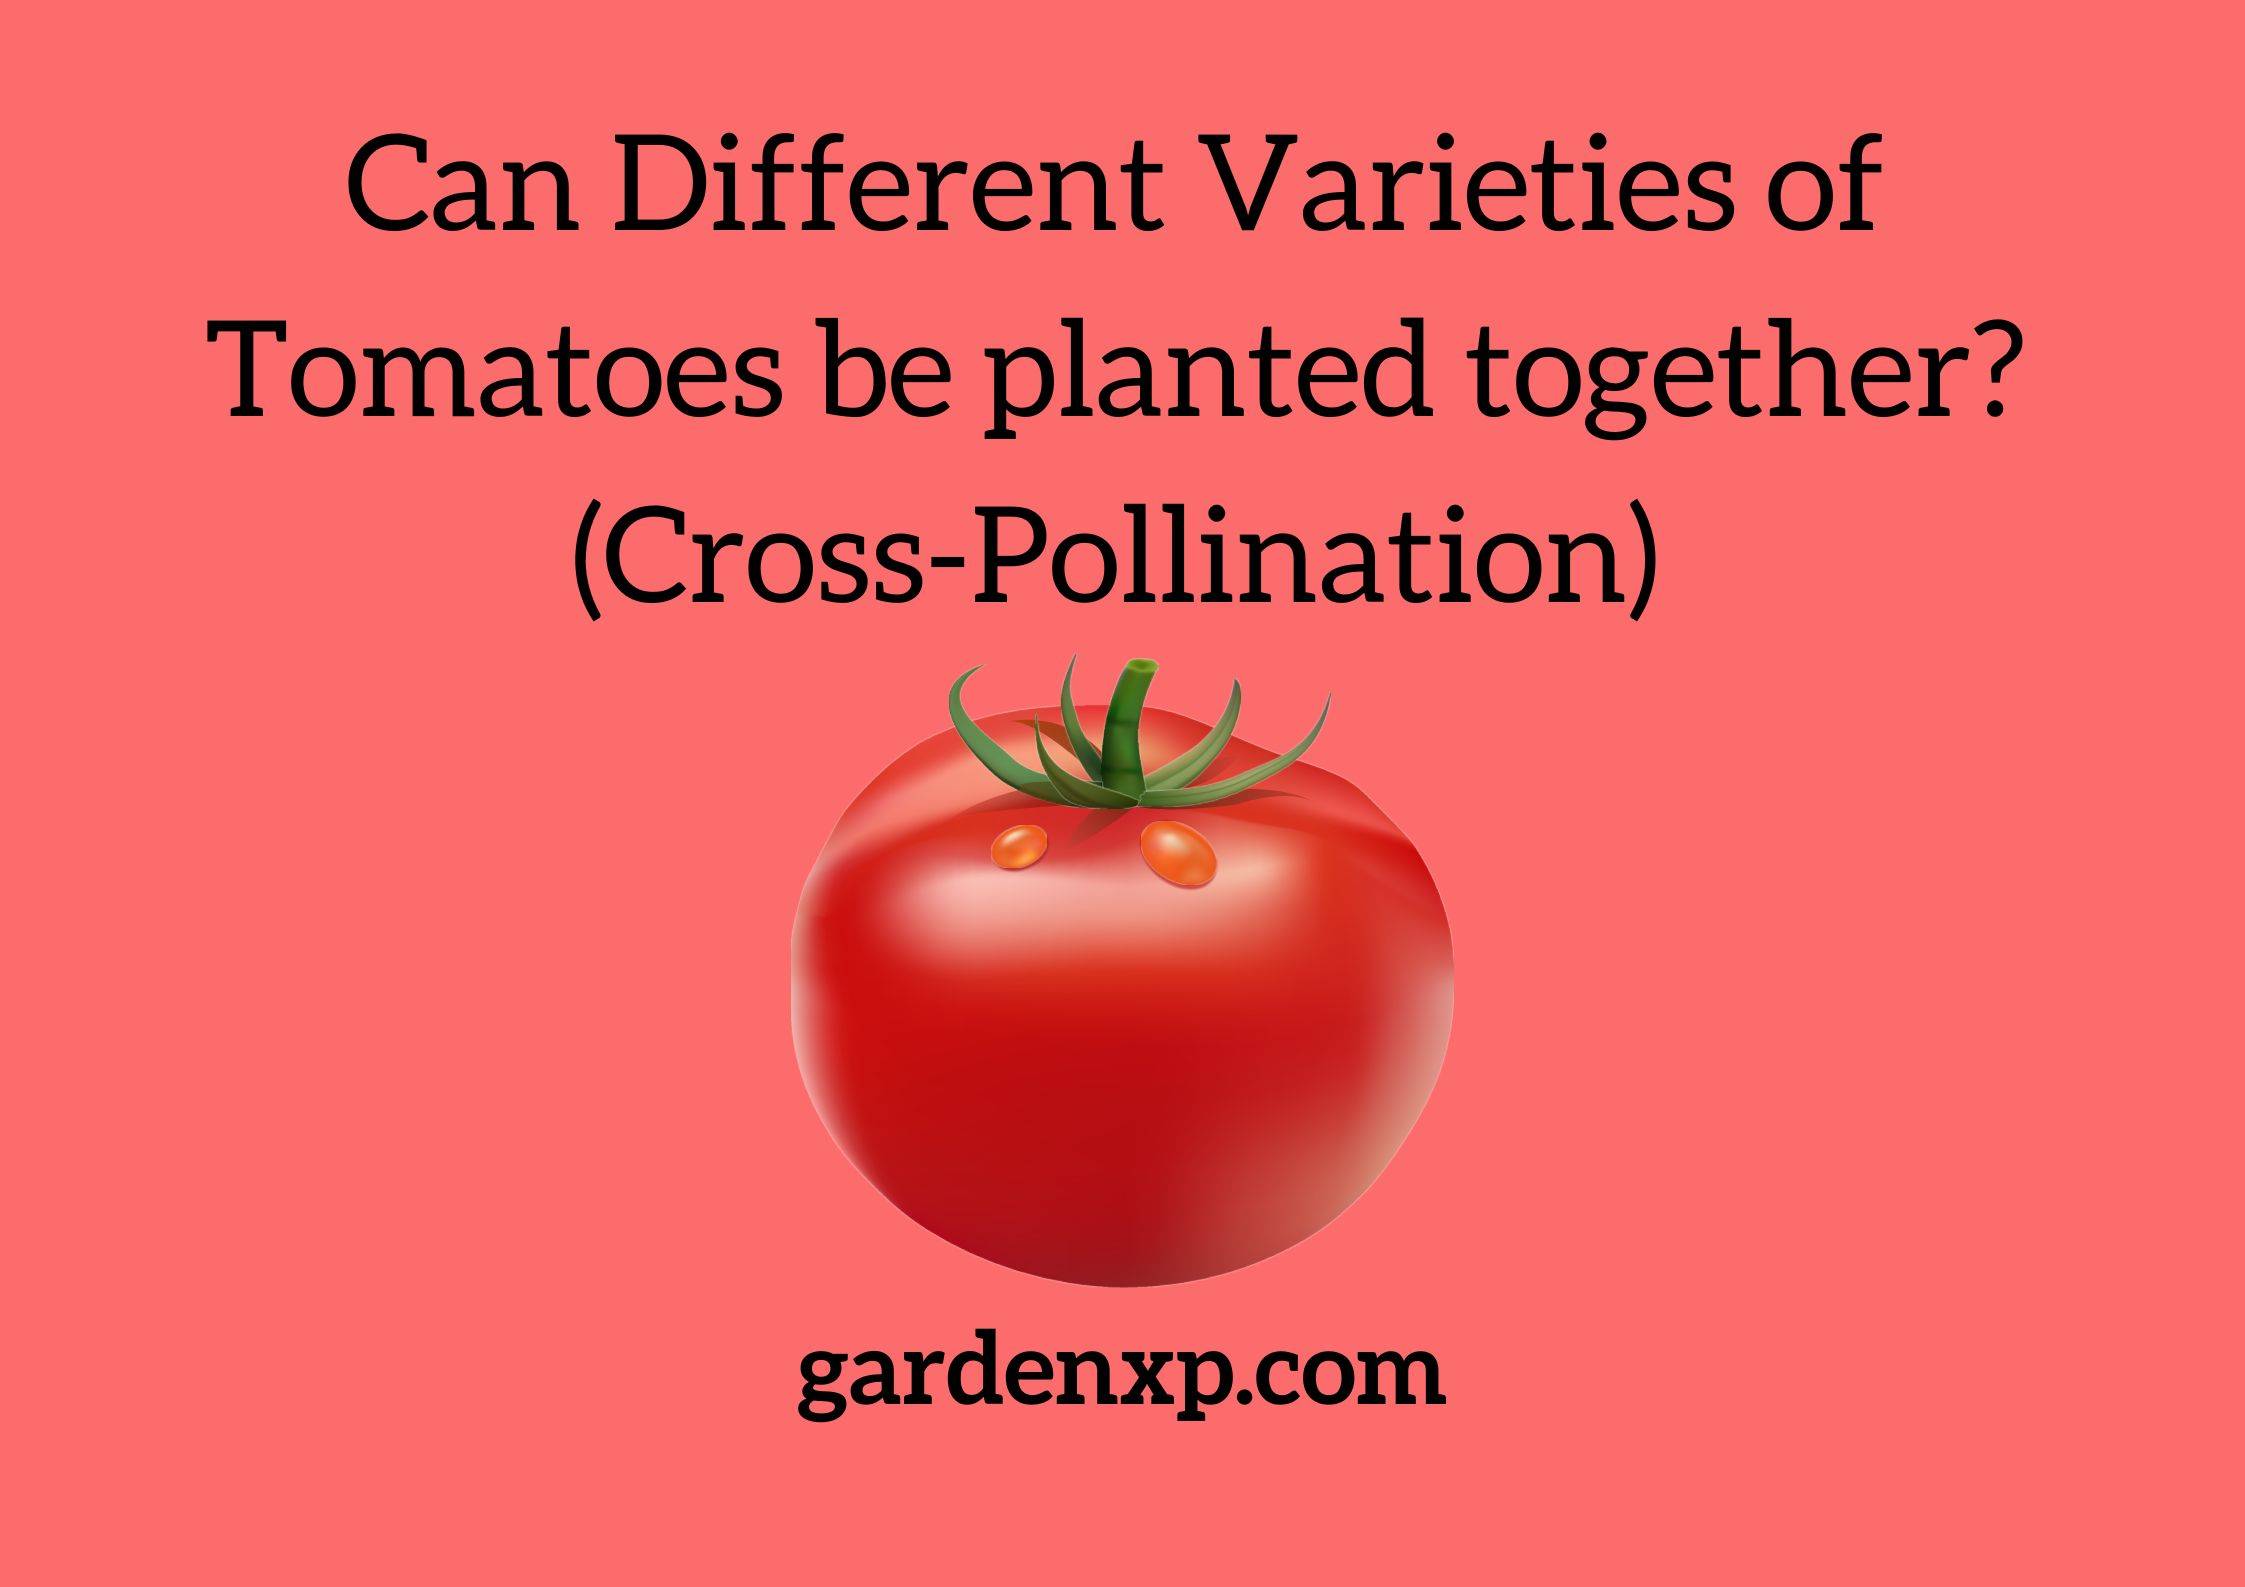 <strong>Can Different Varieties of Tomatoes Be Planted Together? (Cross-Pollination)</strong>